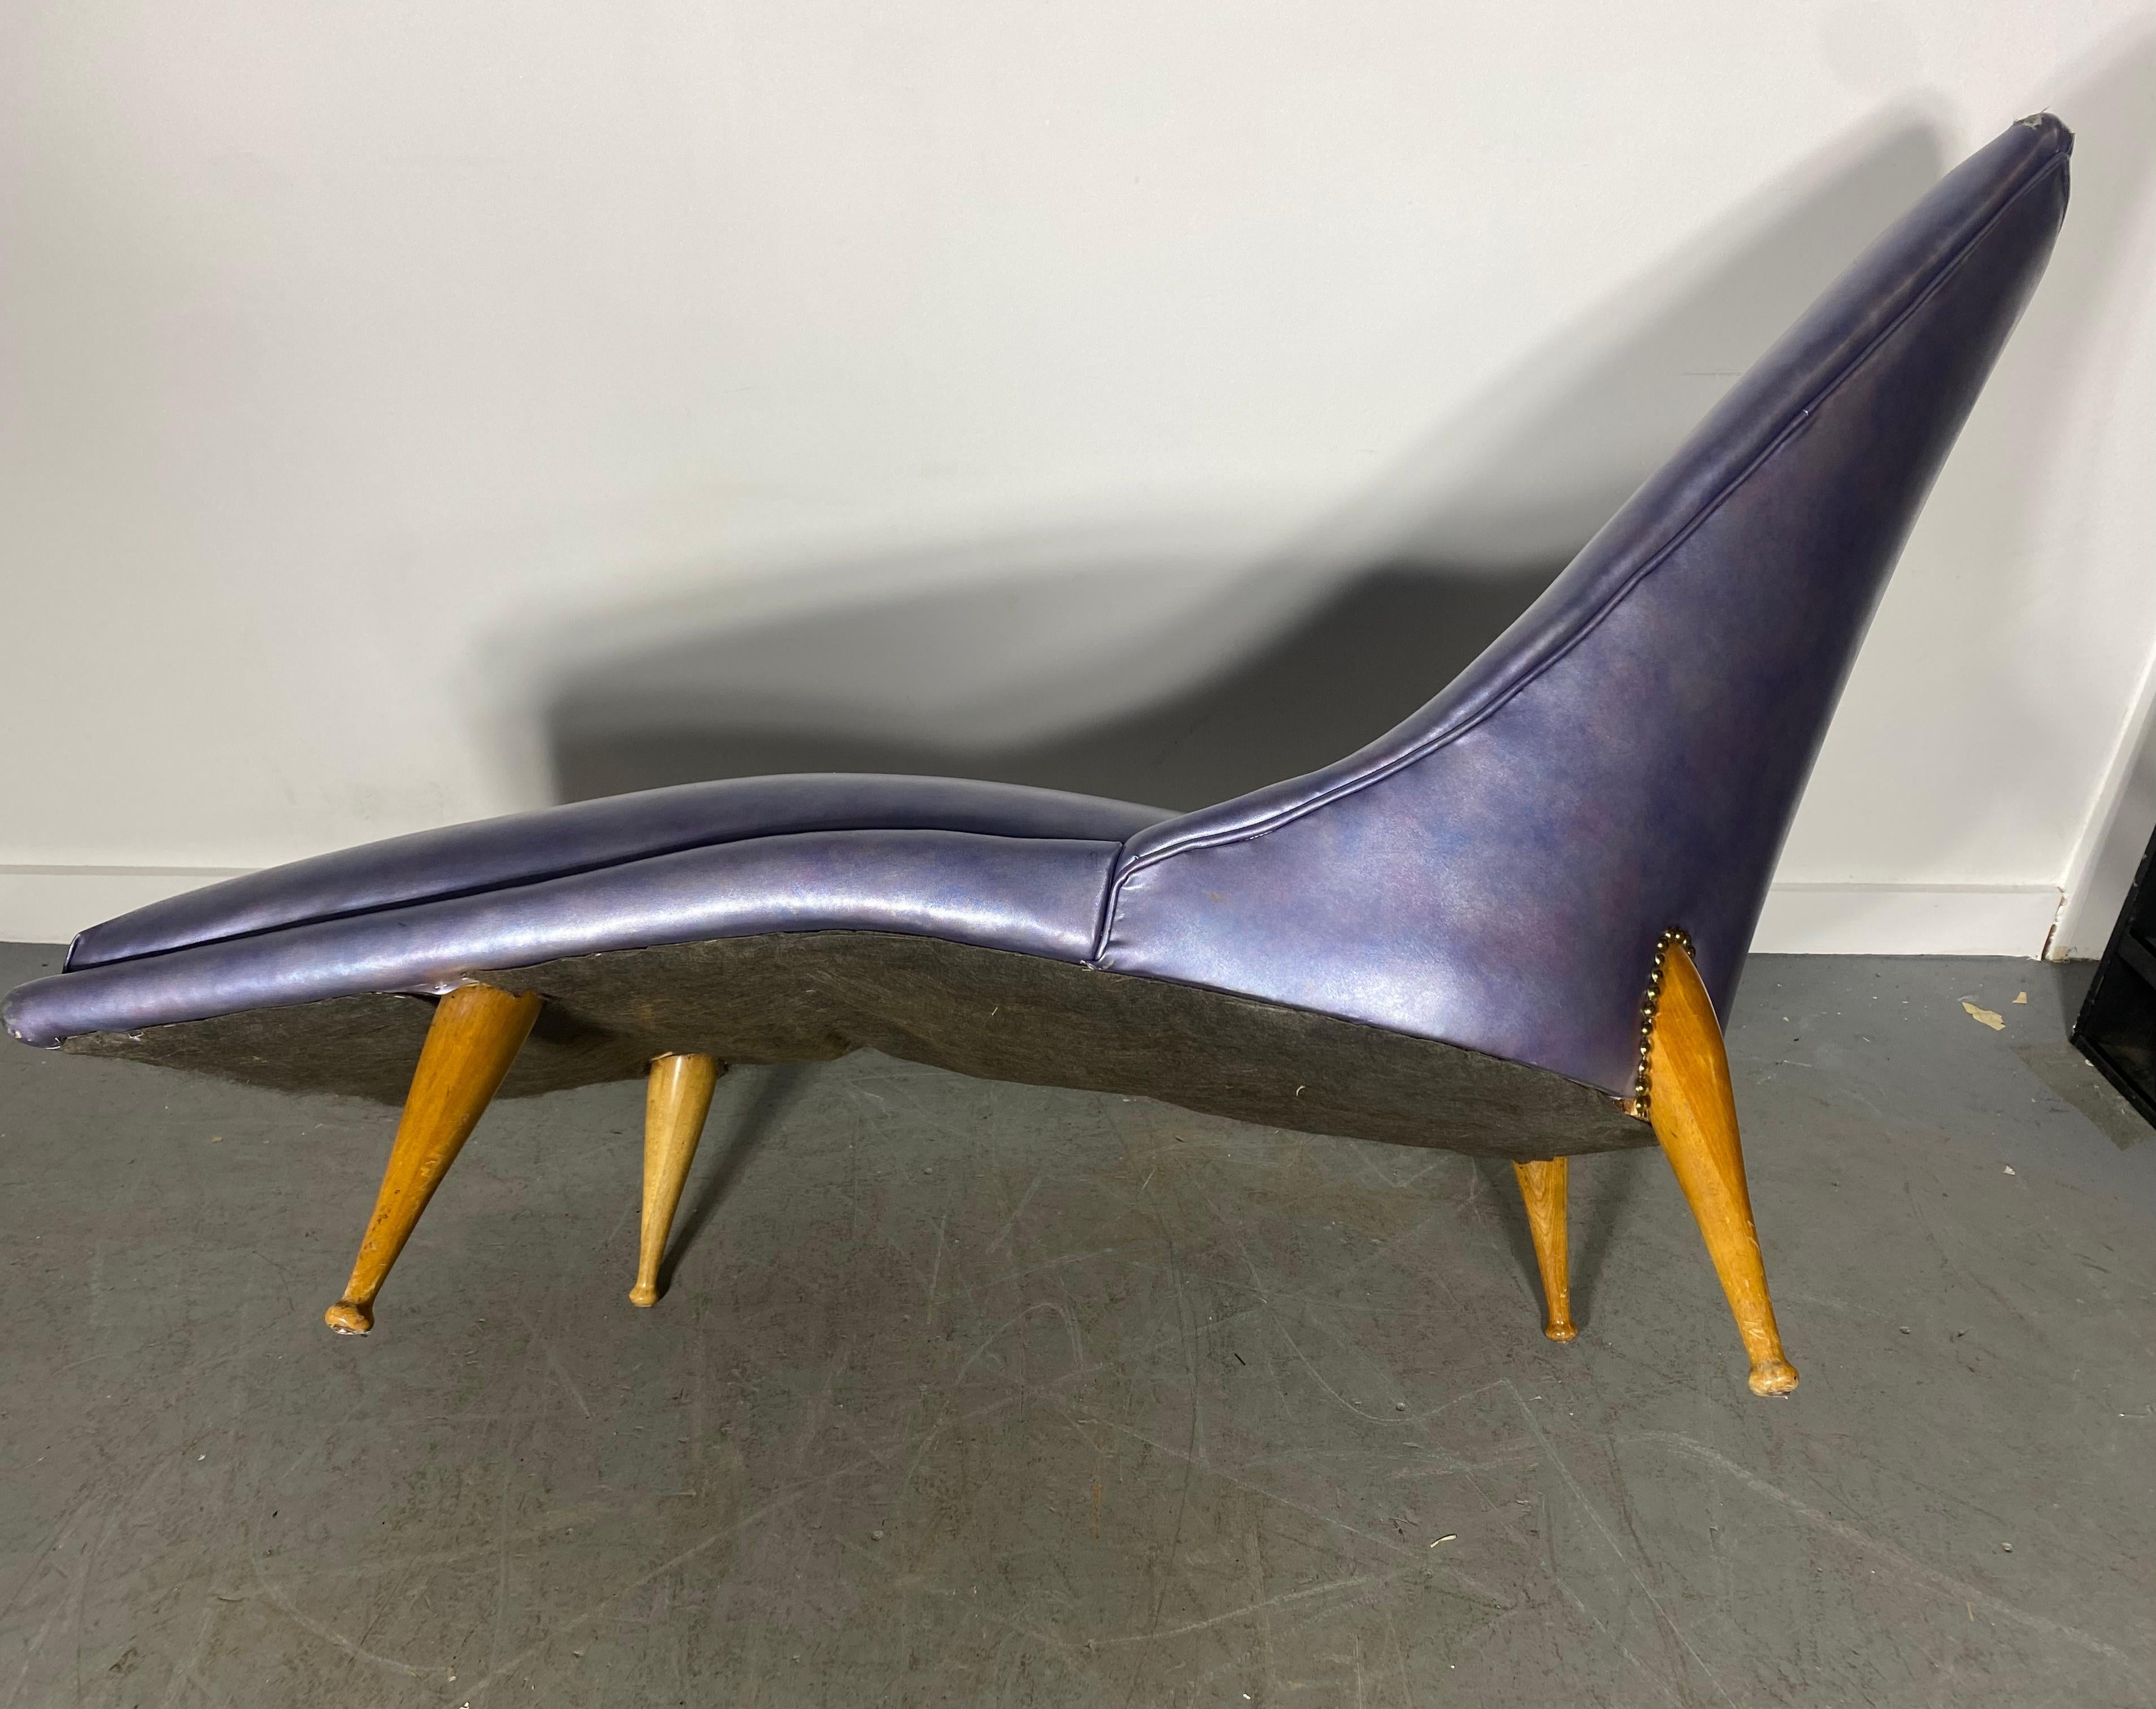 A rare ‘Beautiful Dreamer’ chaise lounge designed by Ben Seibel in the 1950s. This lounge has an elongated curved seat and a dramatically angled back stands on four tapered wooden legs with petite ball feet. USA, Lounge reupholstered at some